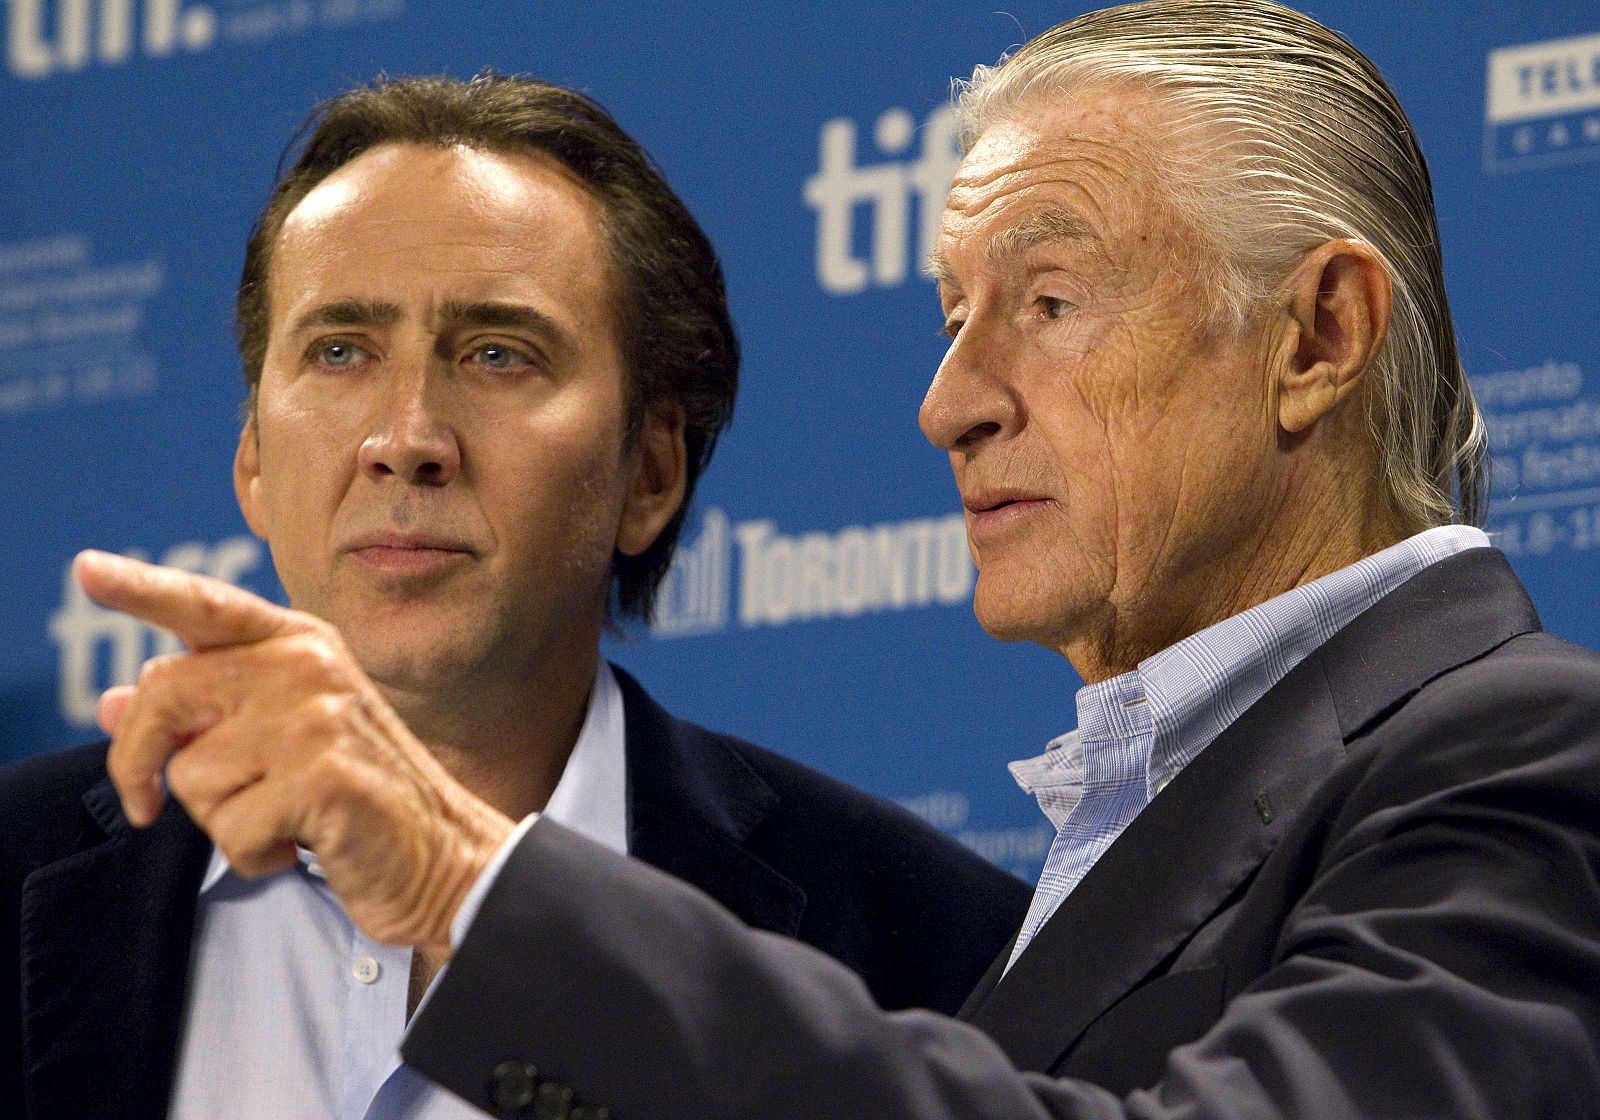 Director Joel Schumacher and cast member Nicolas Cage attend the news conference for the film "Trespass" at the 36th Toronto International Film Festival